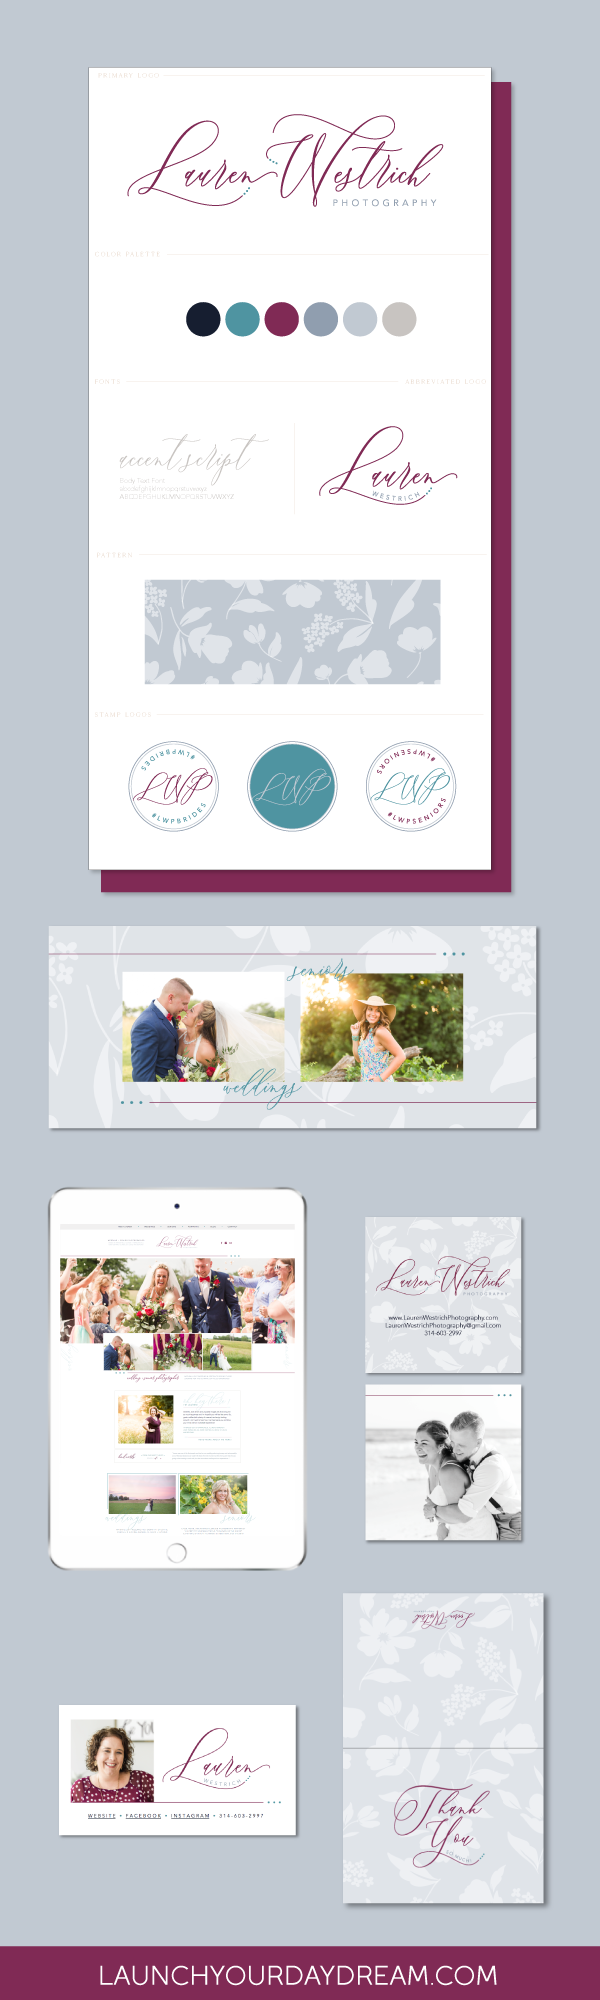 This is a joyful and simple inspired brand design portfolio and Showit web design for Lauren Westrich Photography